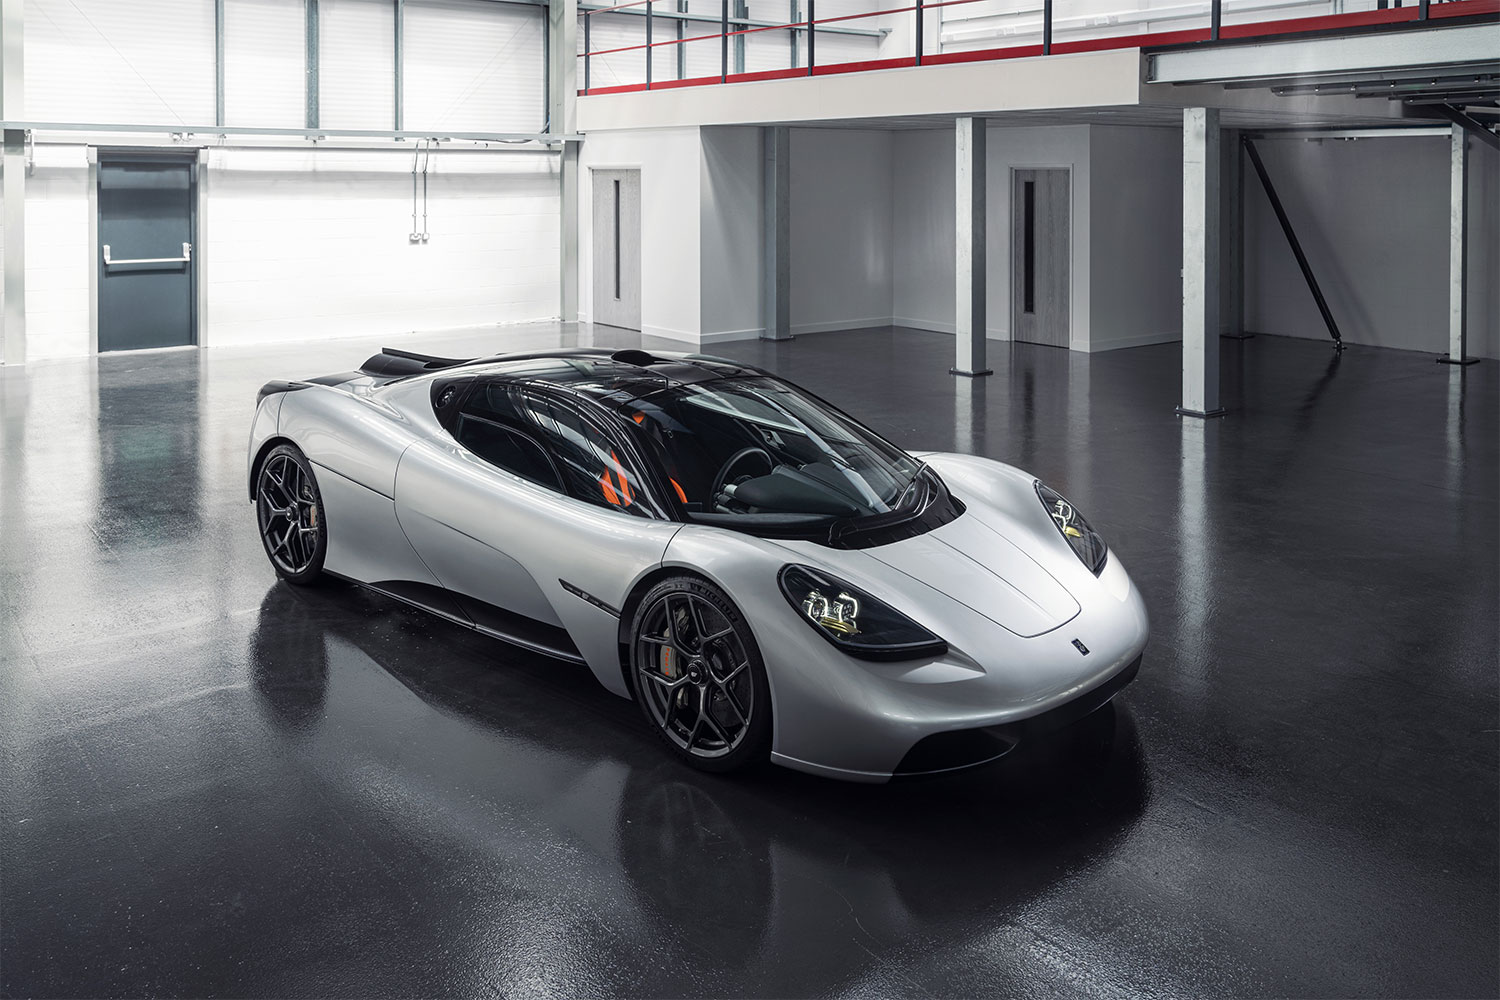 Gordon Murray Automotive Has Started Building the First T.50 Supercar 